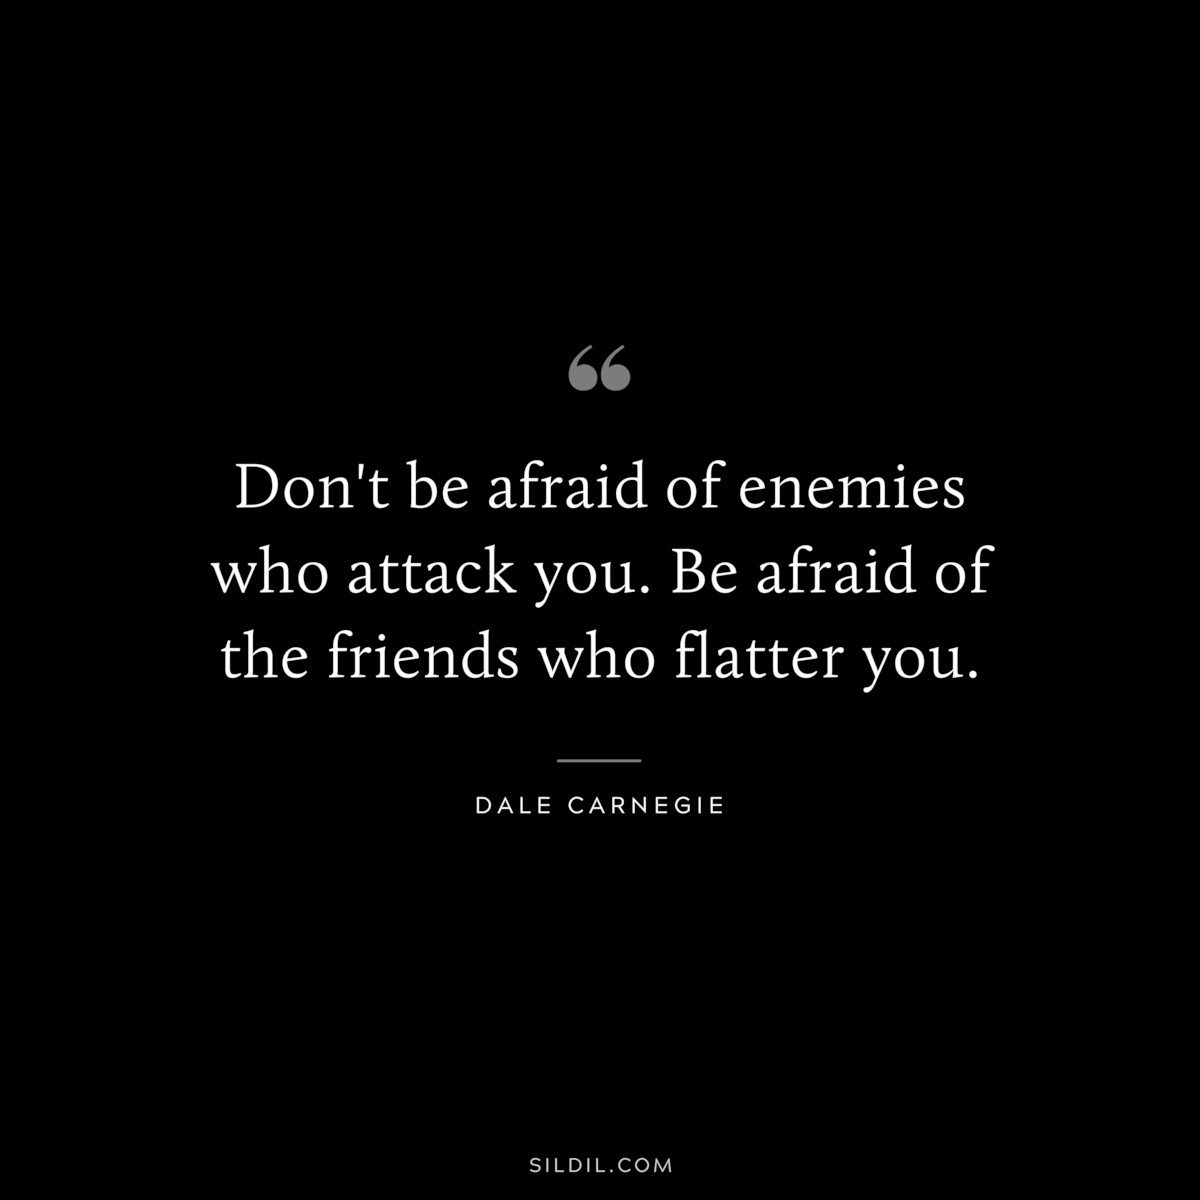 Don't be afraid of enemies who attack you. Be afraid of the friends who flatter you.― Dale Carnegie